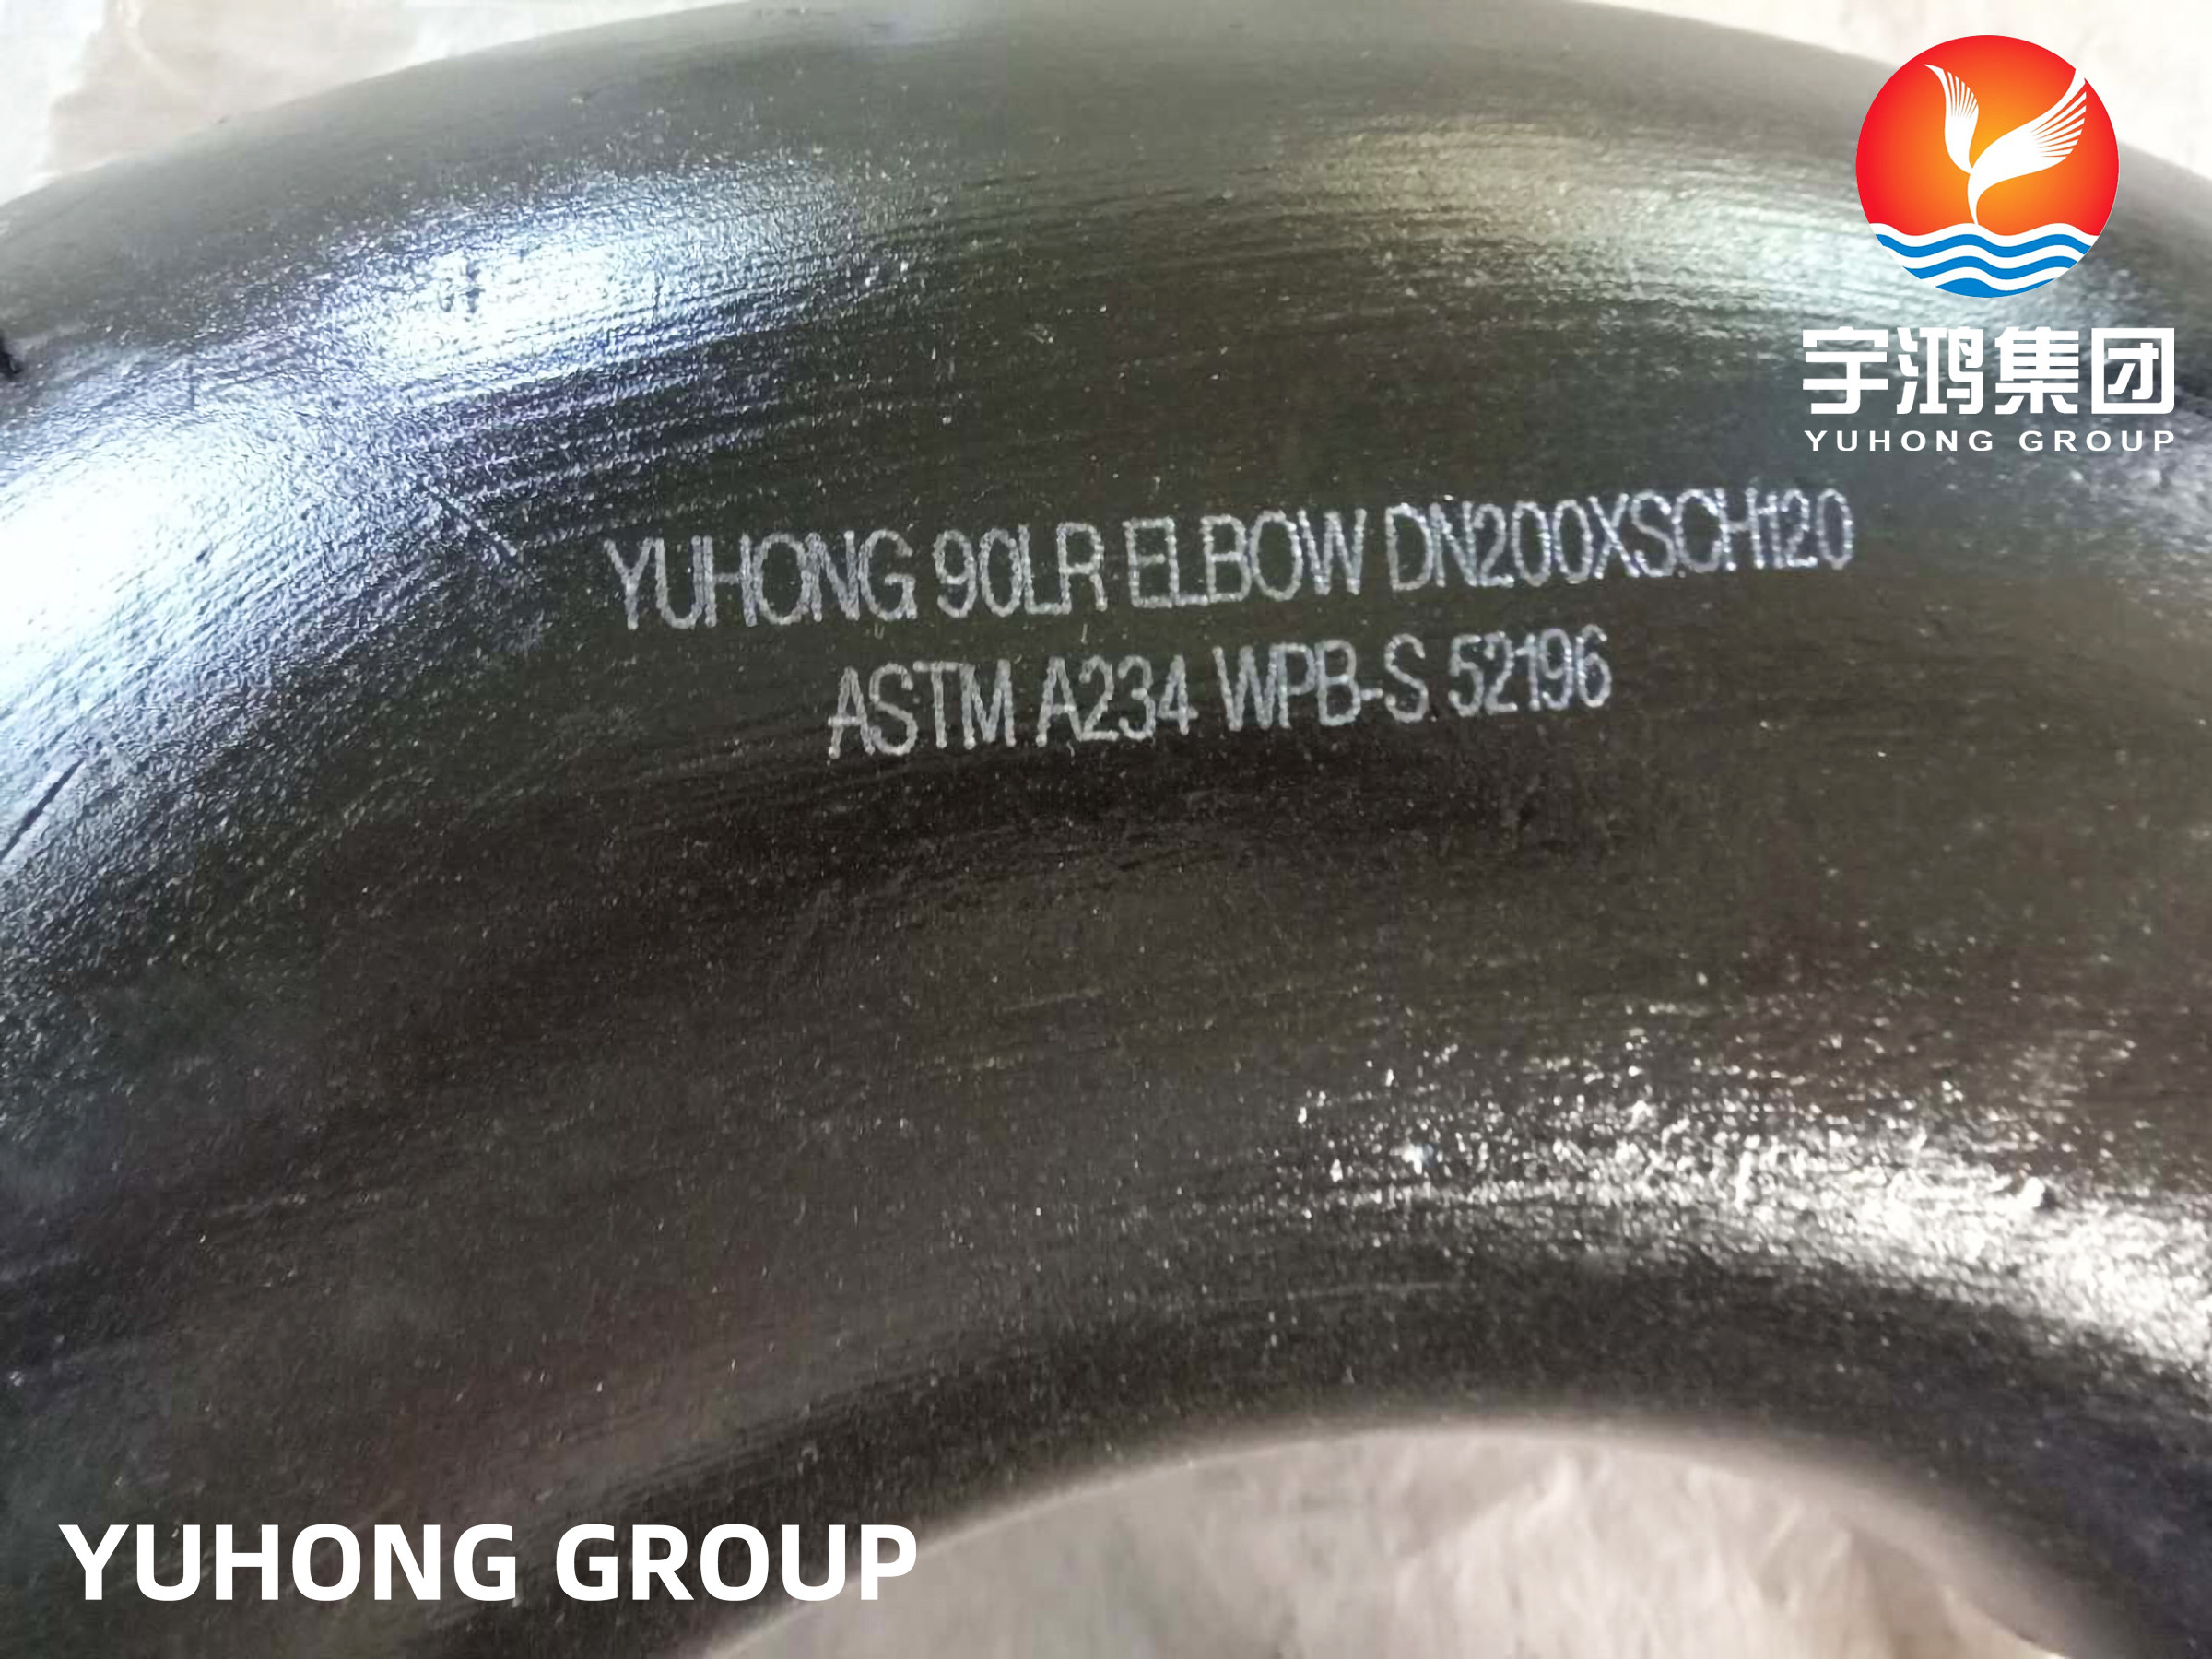 China ASTM A234 WPB-S 45/90 DEGREE CARBON STEEL PIPE ELBOW BUTT WELD FITTING B16.9 BLACK PAINTING wholesale